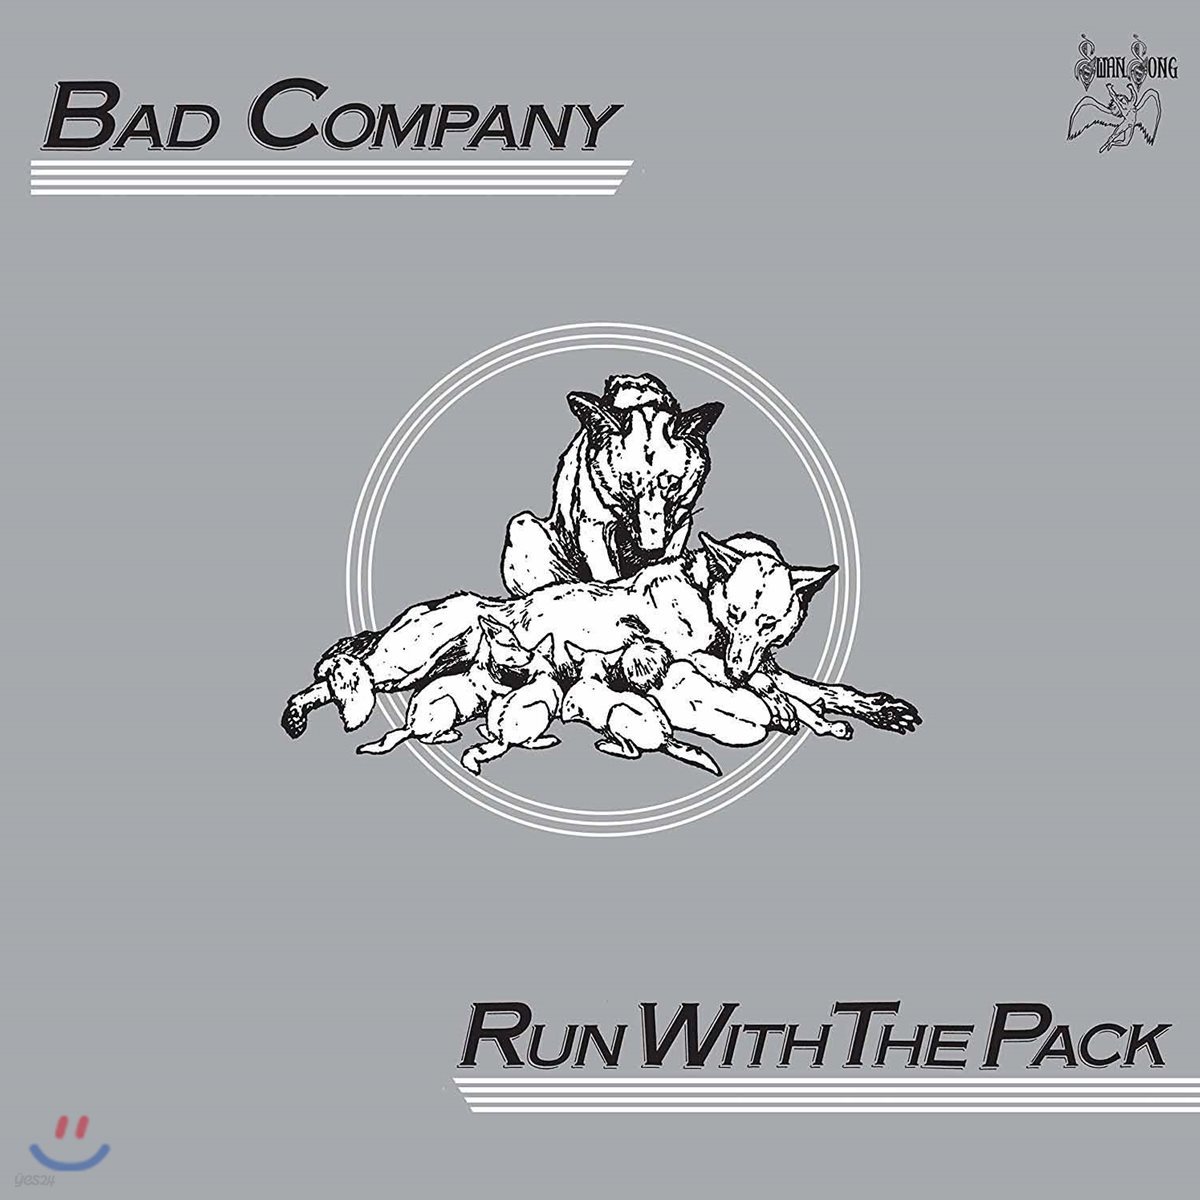 Bad Company (배드 컴퍼니) - Run With The Pack [2LP]